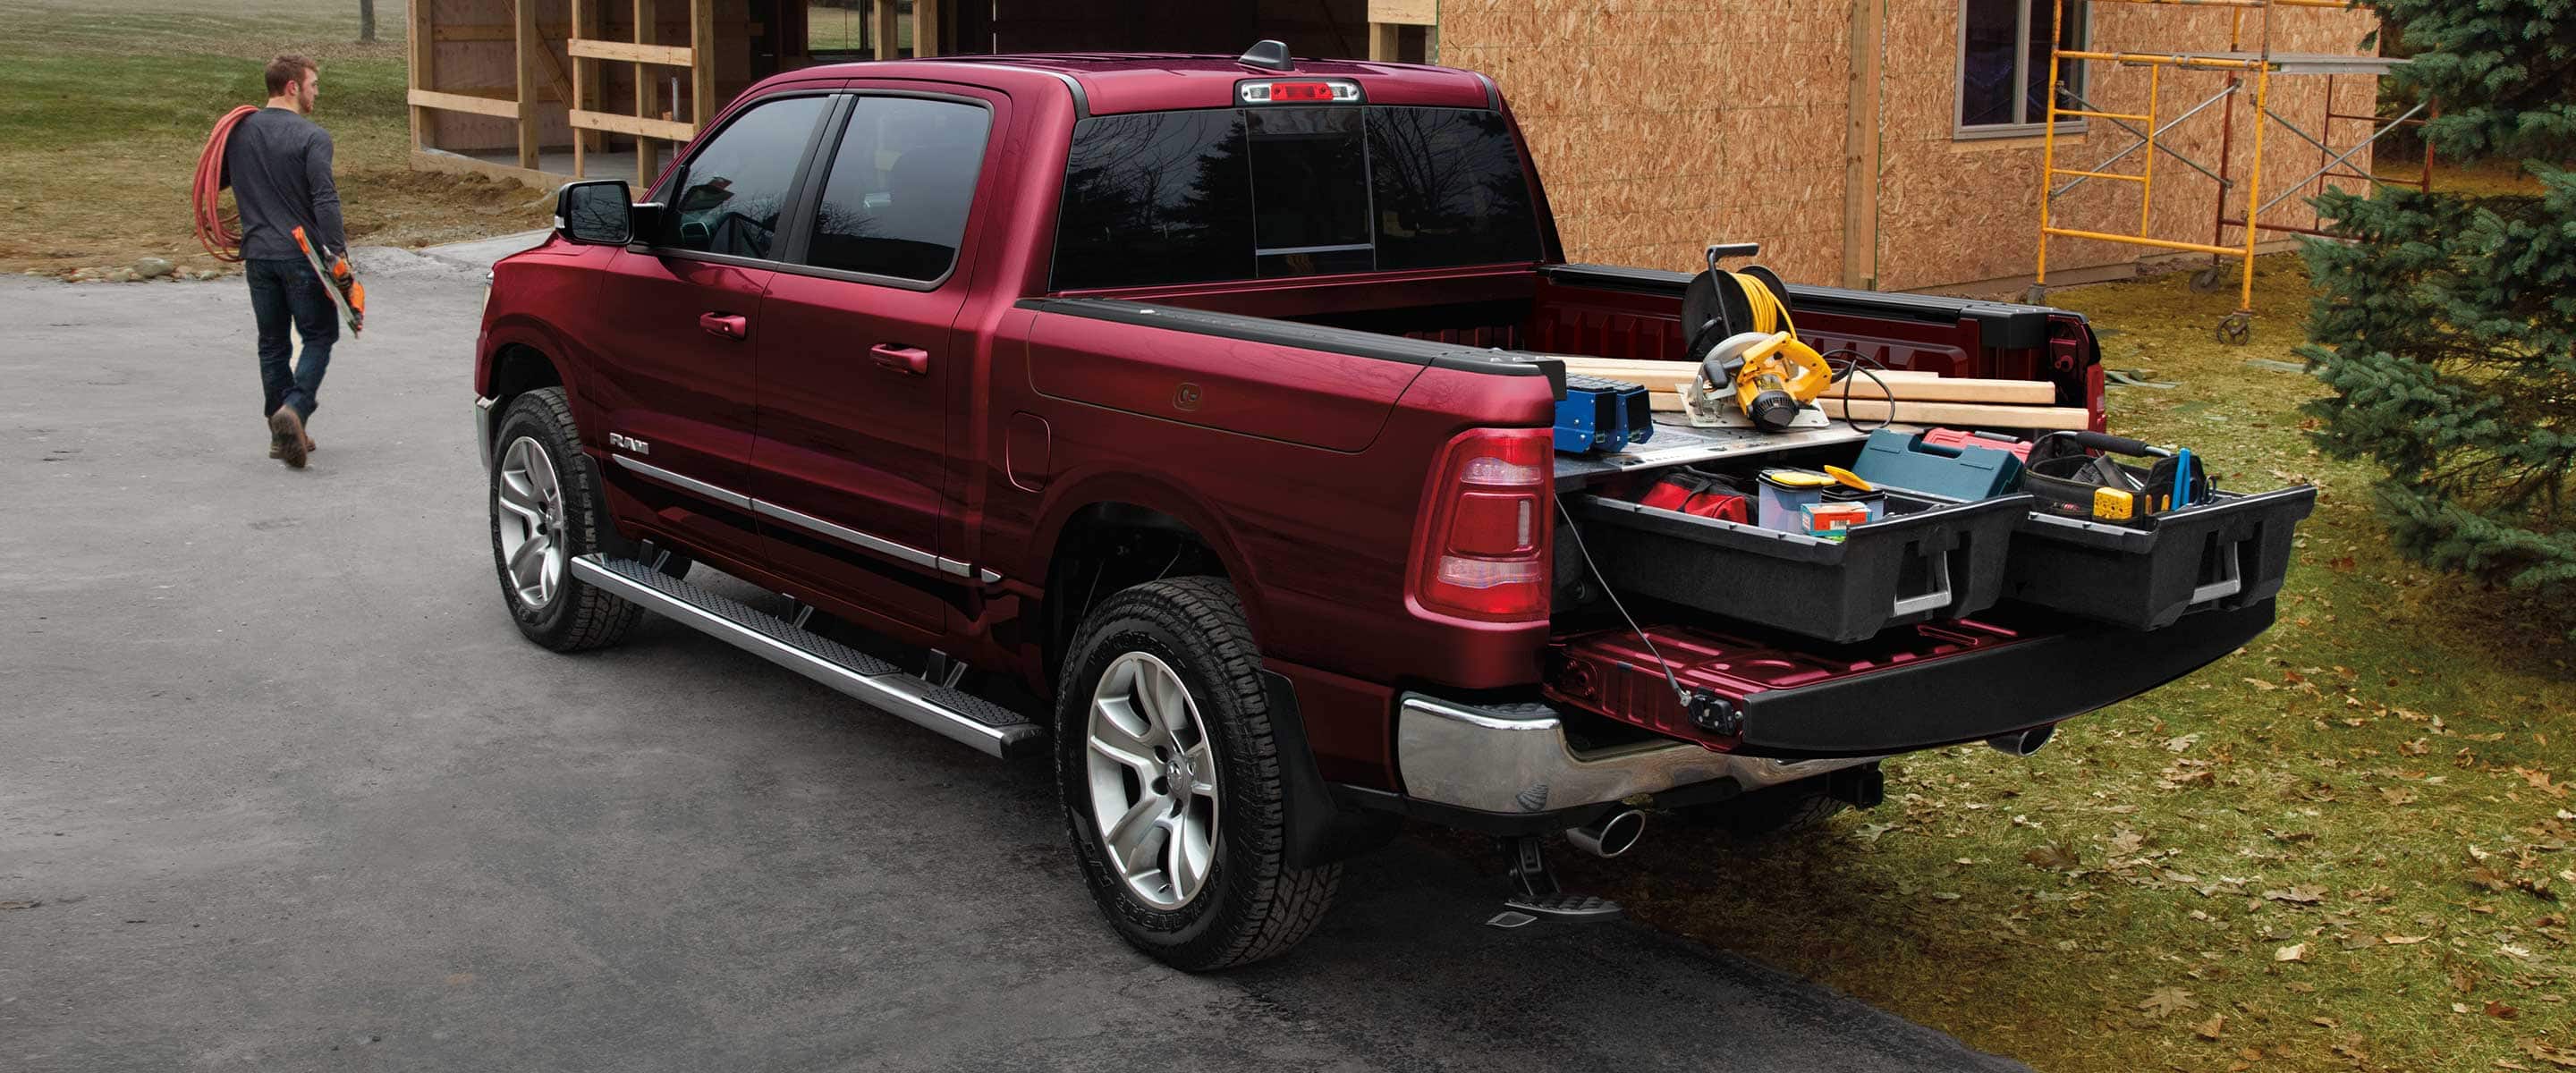 The Ram 1500 with its tailgate down to reveal the truck bed upfitted with slide-out drawers filled with tools and construction equipment.